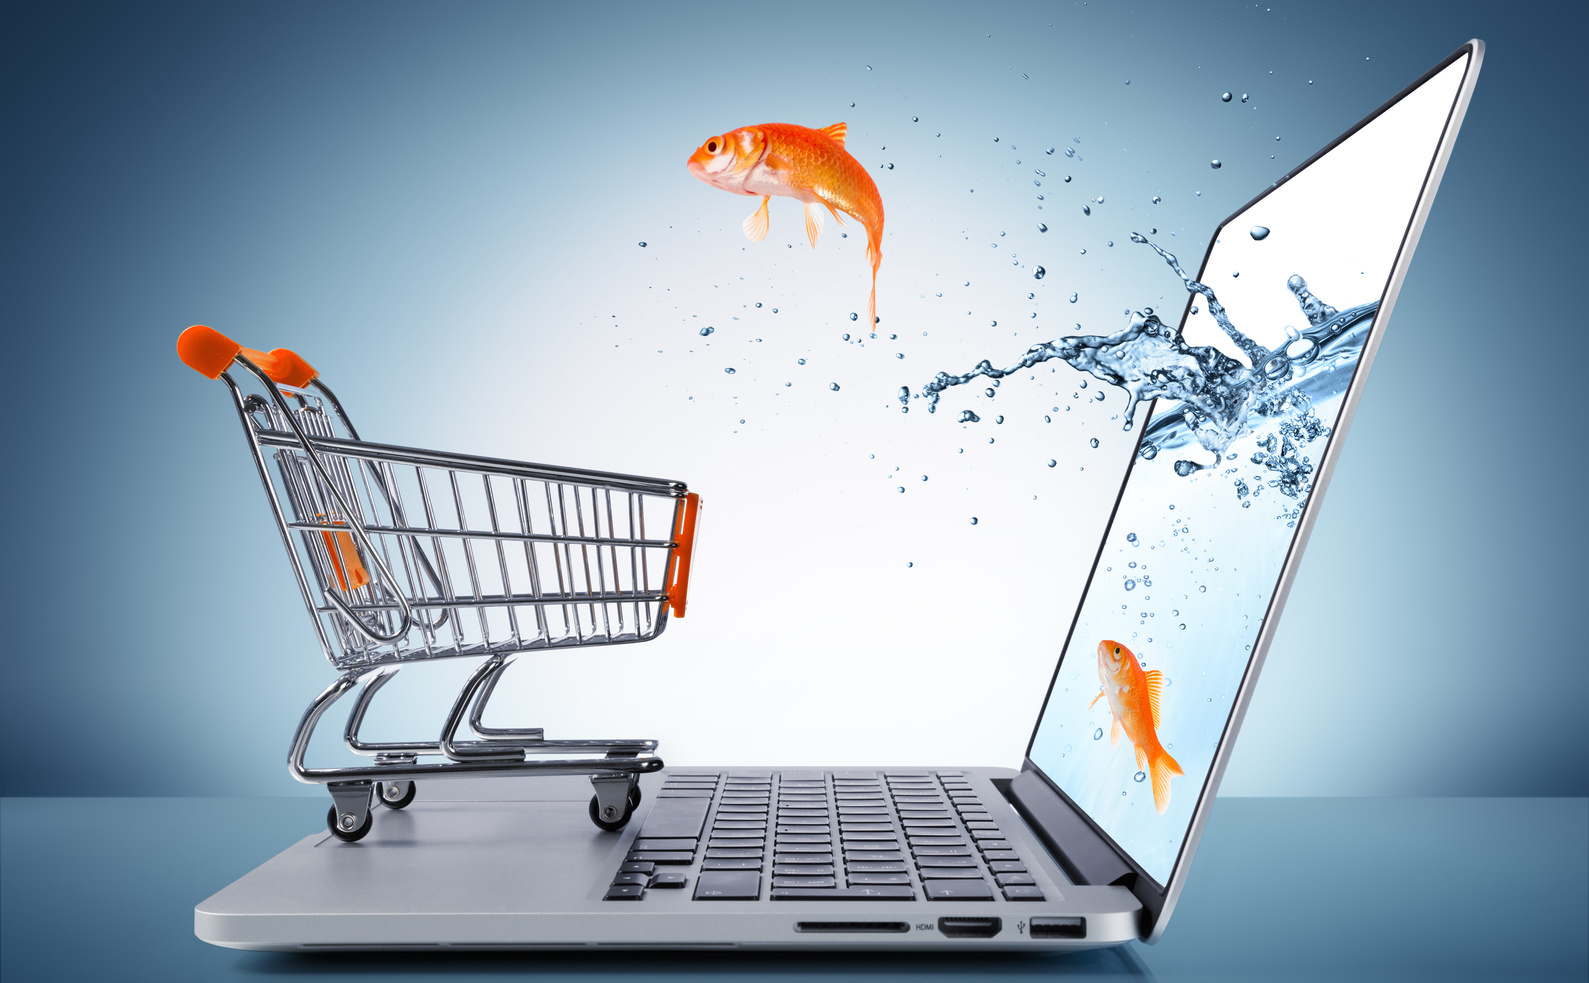 E-Commerce grew by 36 per cent in India in the last quarter of 2020: Unicommerce and Kearney Report